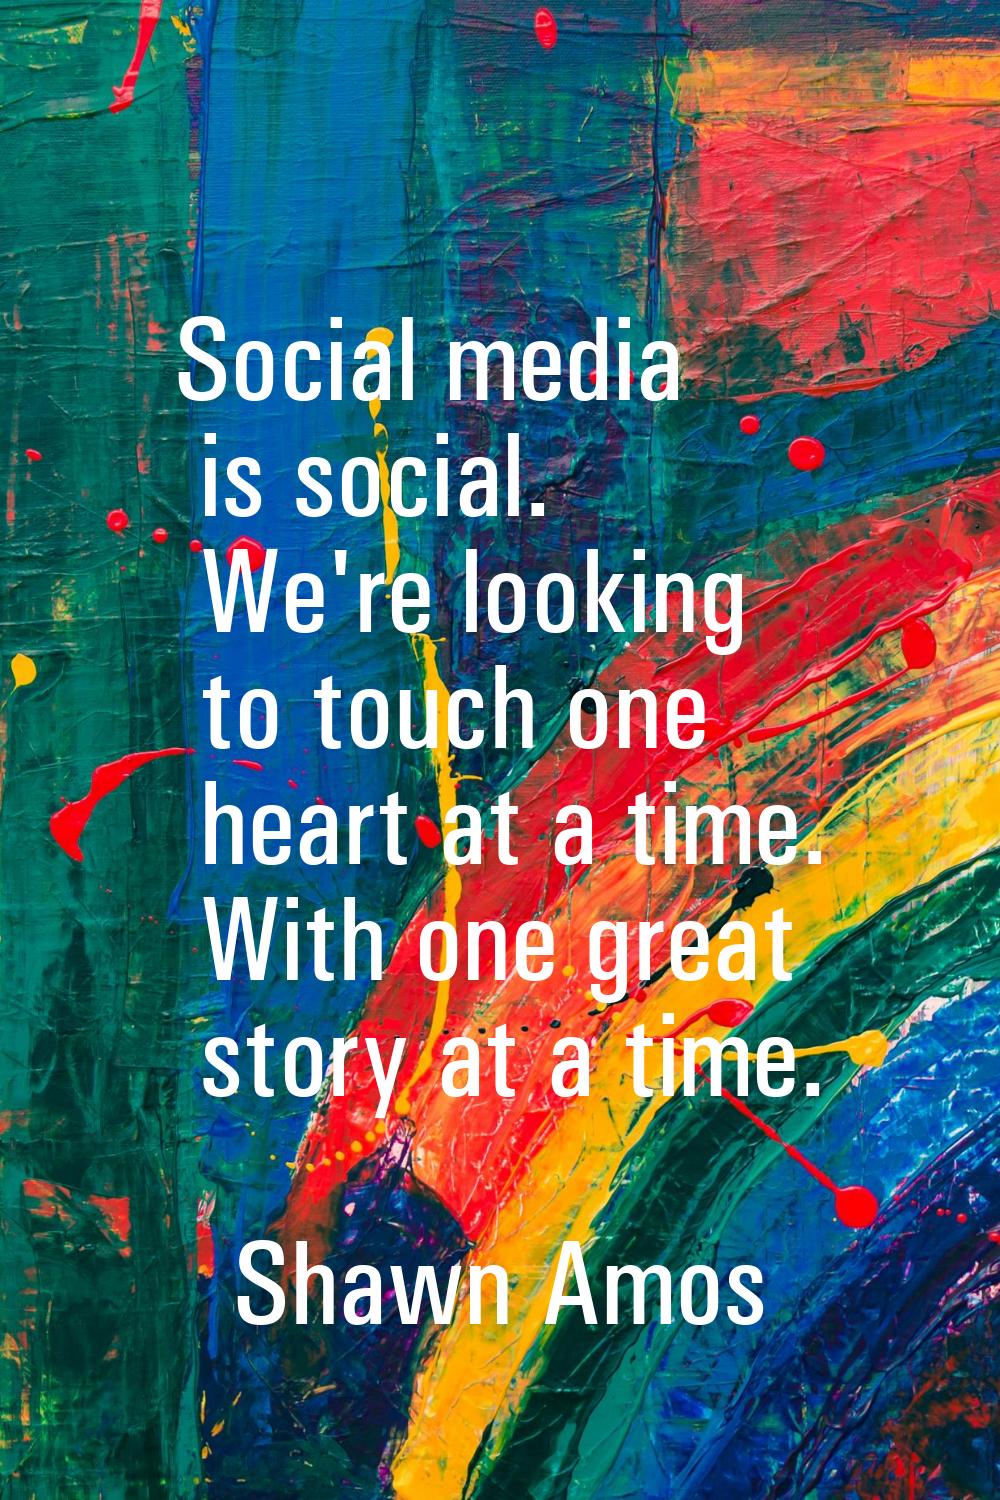 Social media is social. We're looking to touch one heart at a time. With one great story at a time.